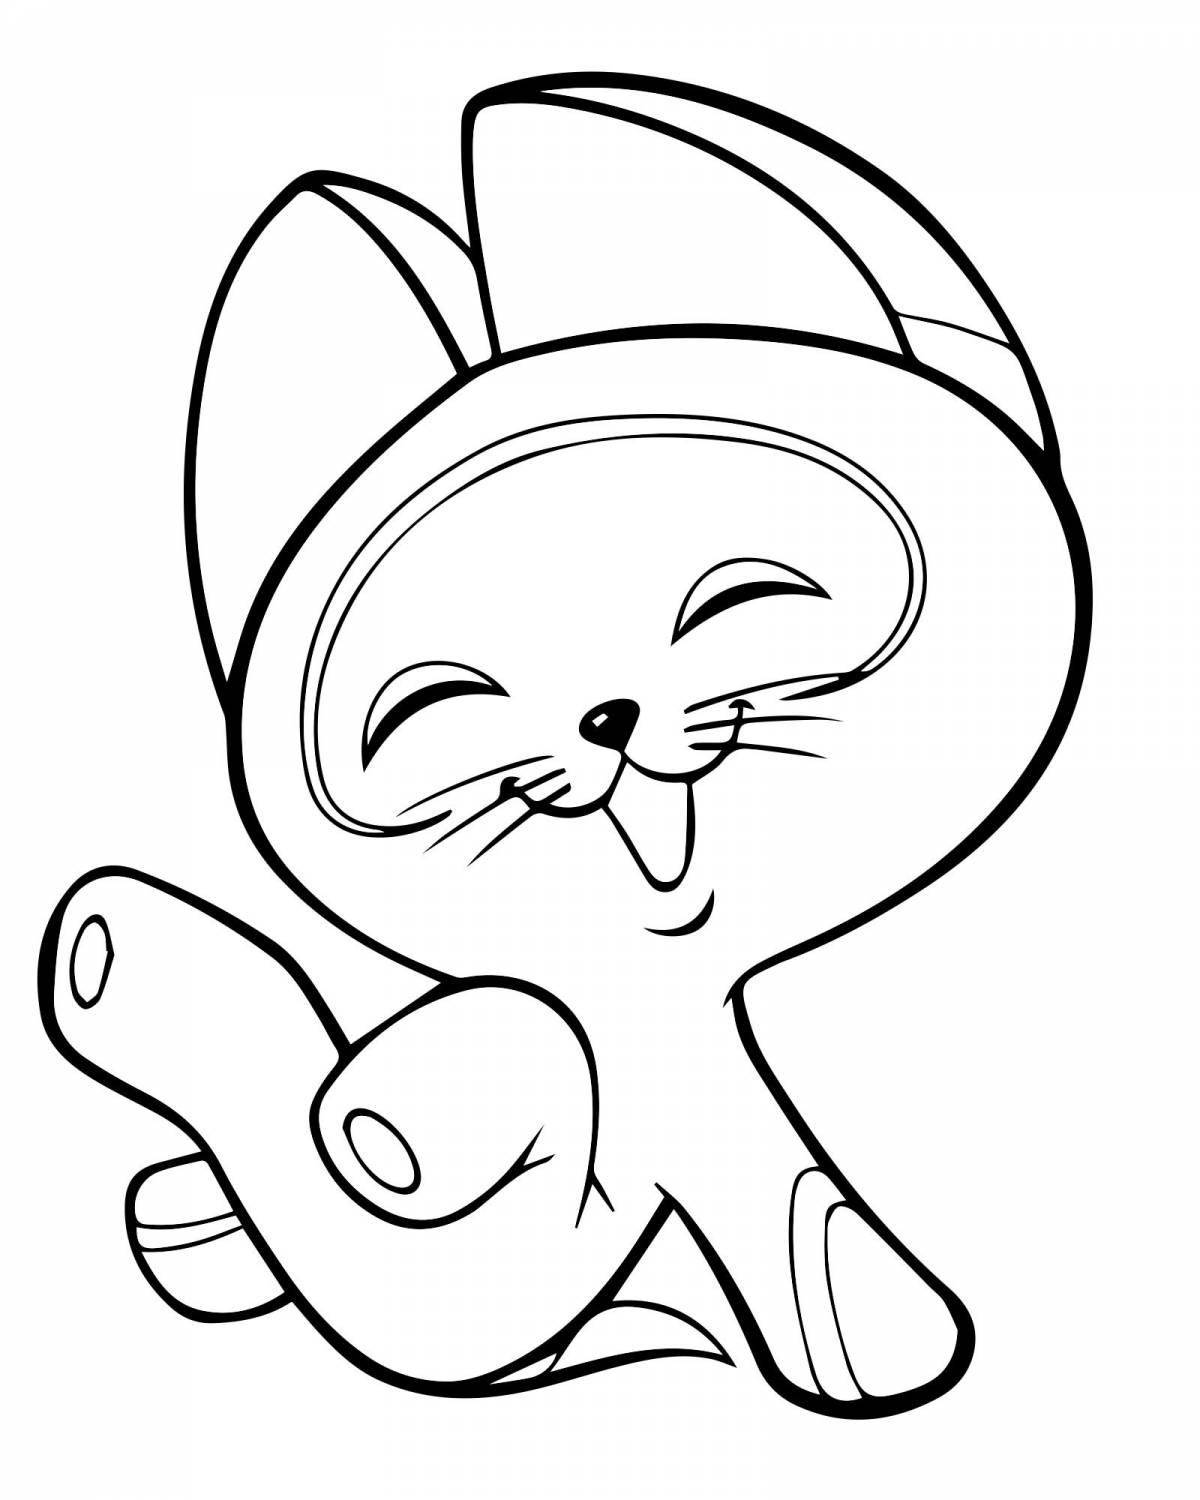 Cute woof coloring page